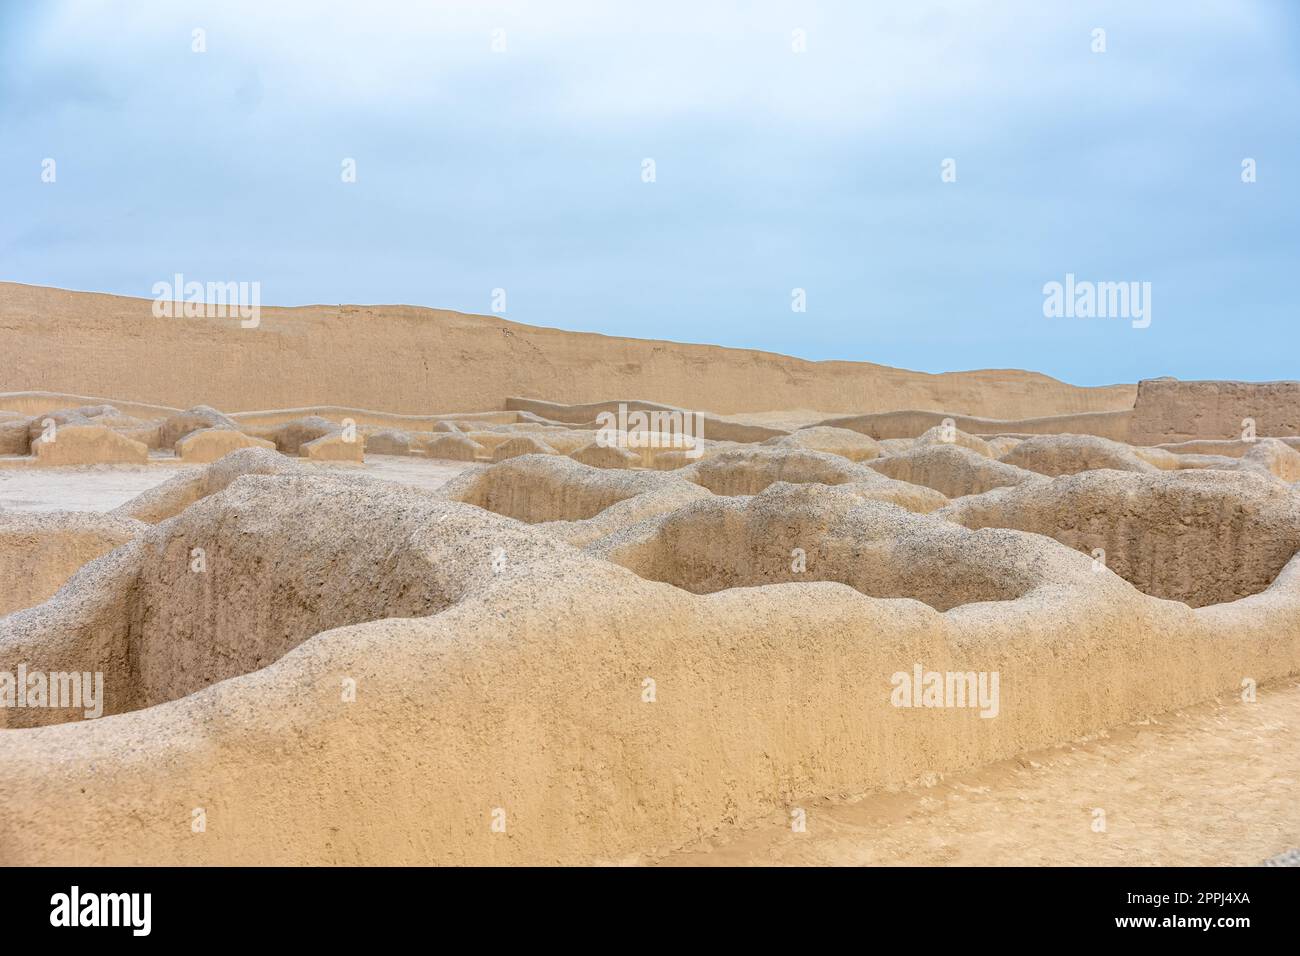 Sacred City of Caral-Supe archaeological site in Peru Stock Photo